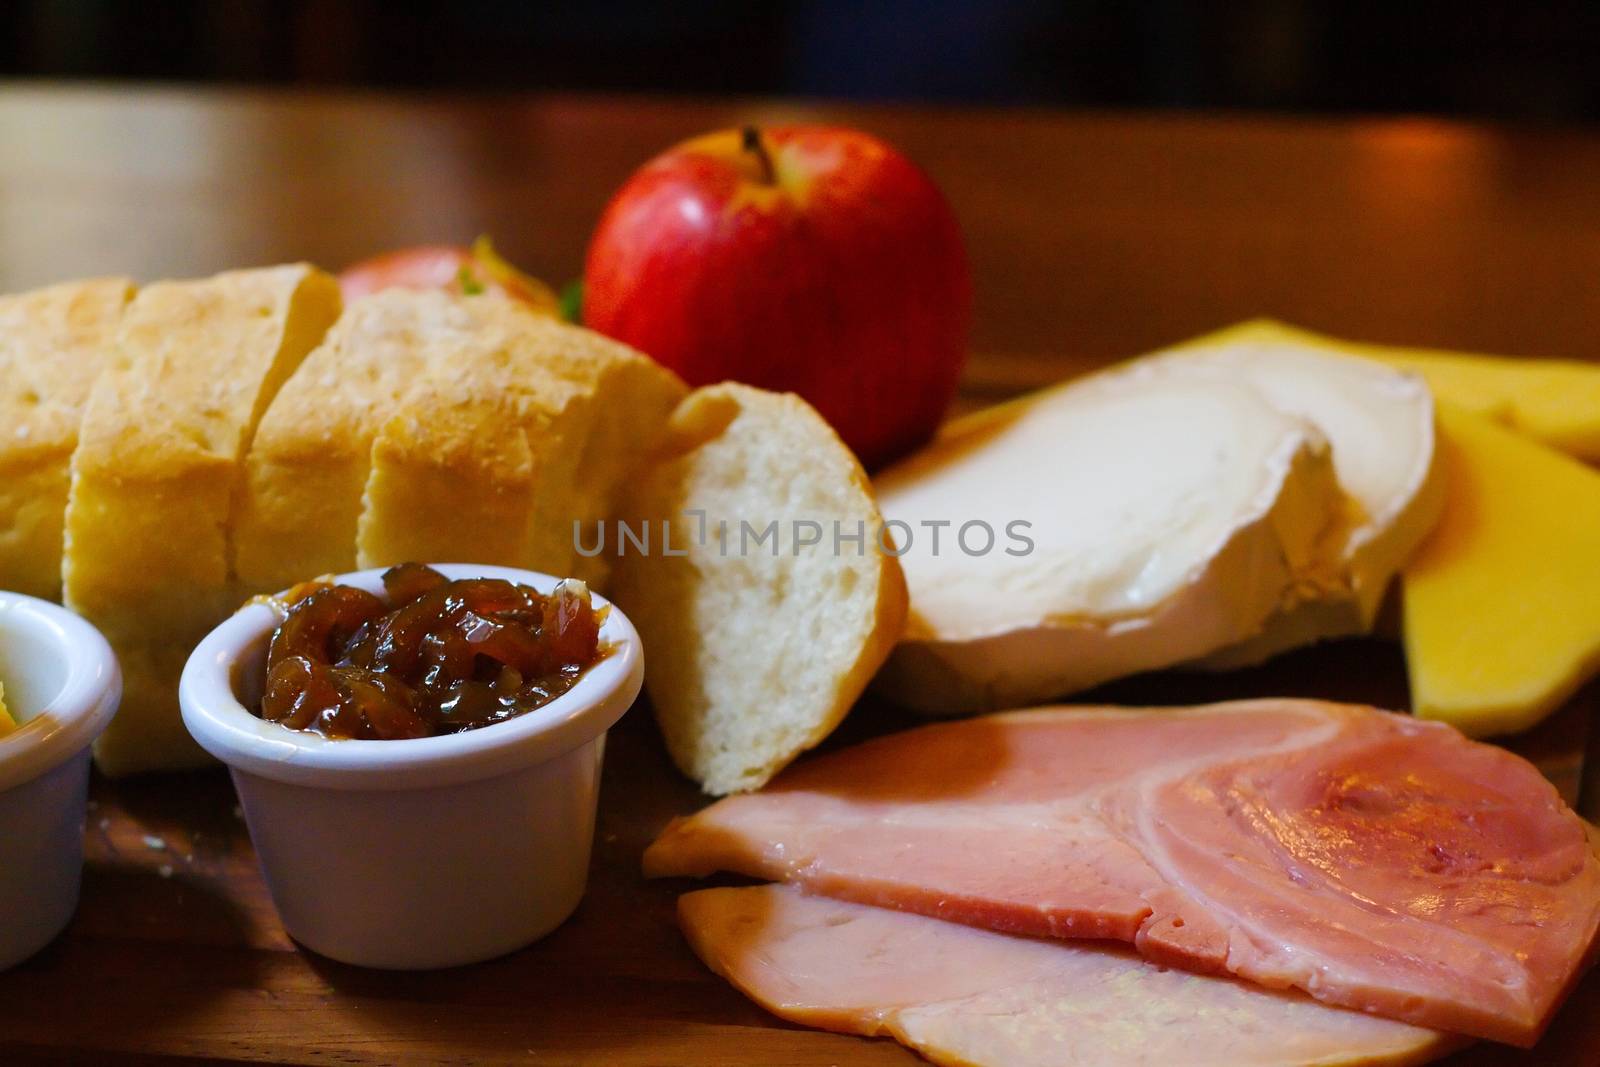 Ploughman's lunch by totony